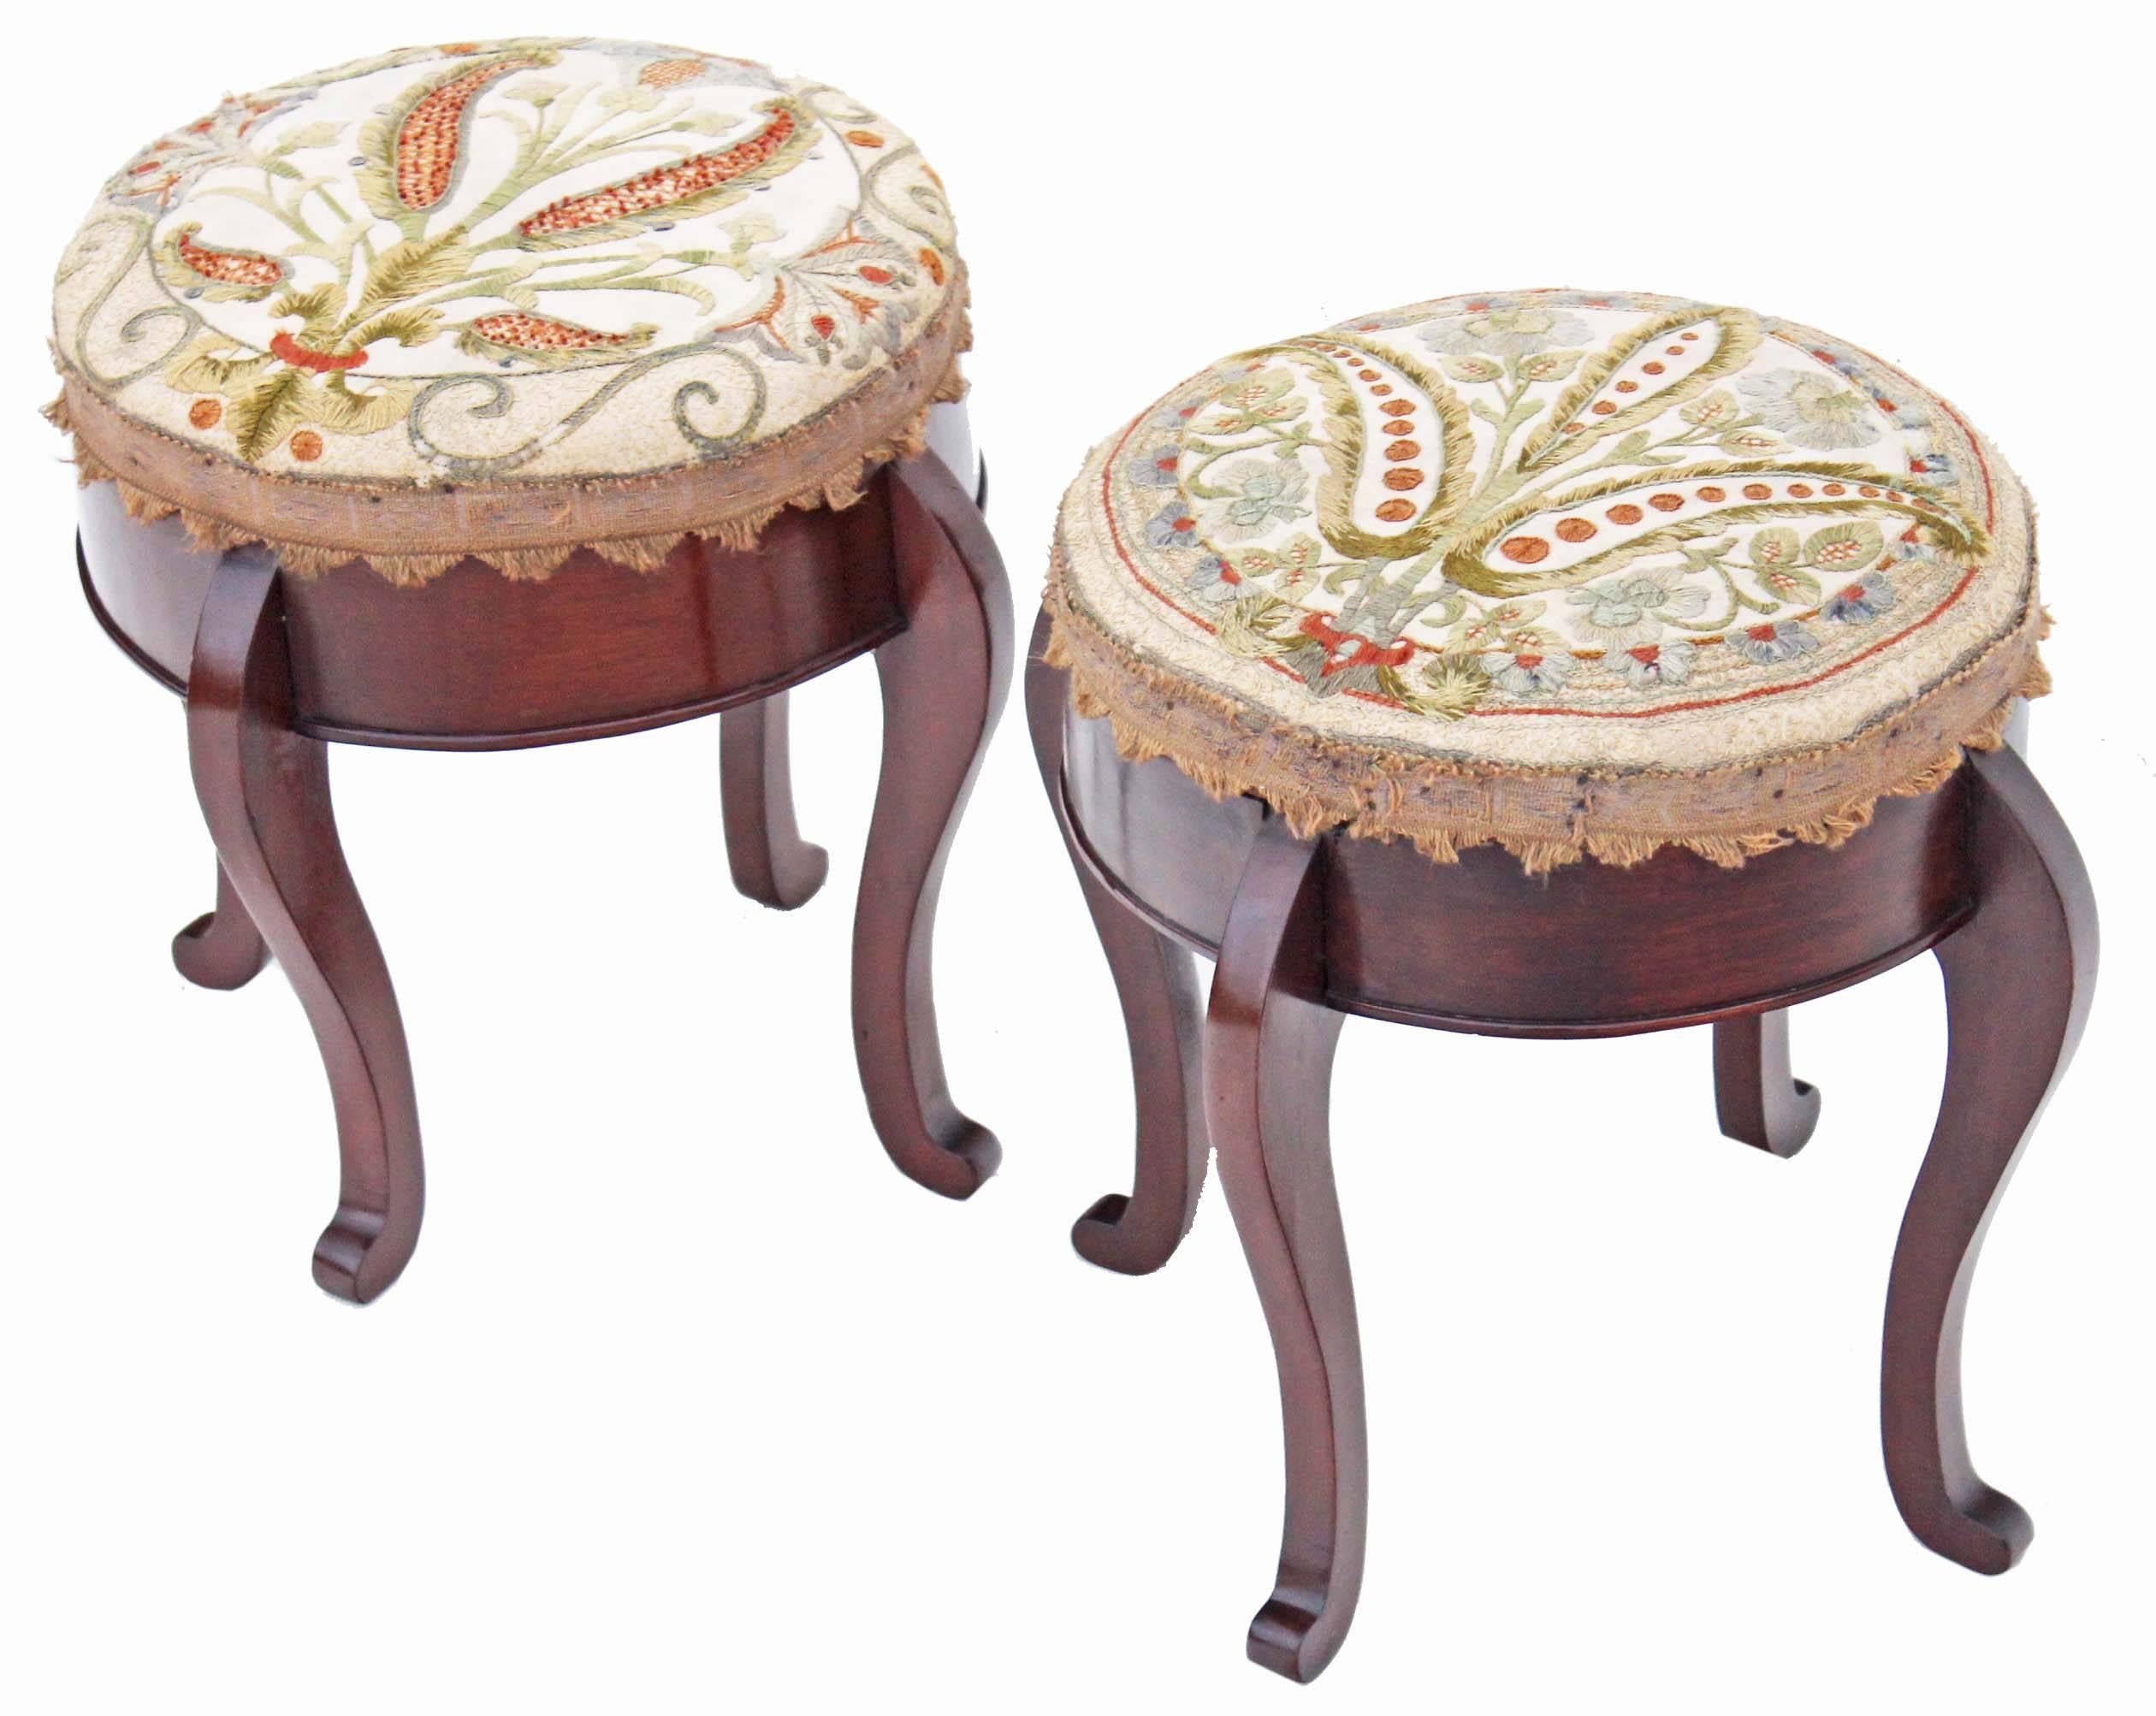 Antique Pair of 19th Century Victorian Foot Stools Embroidered For Sale 4